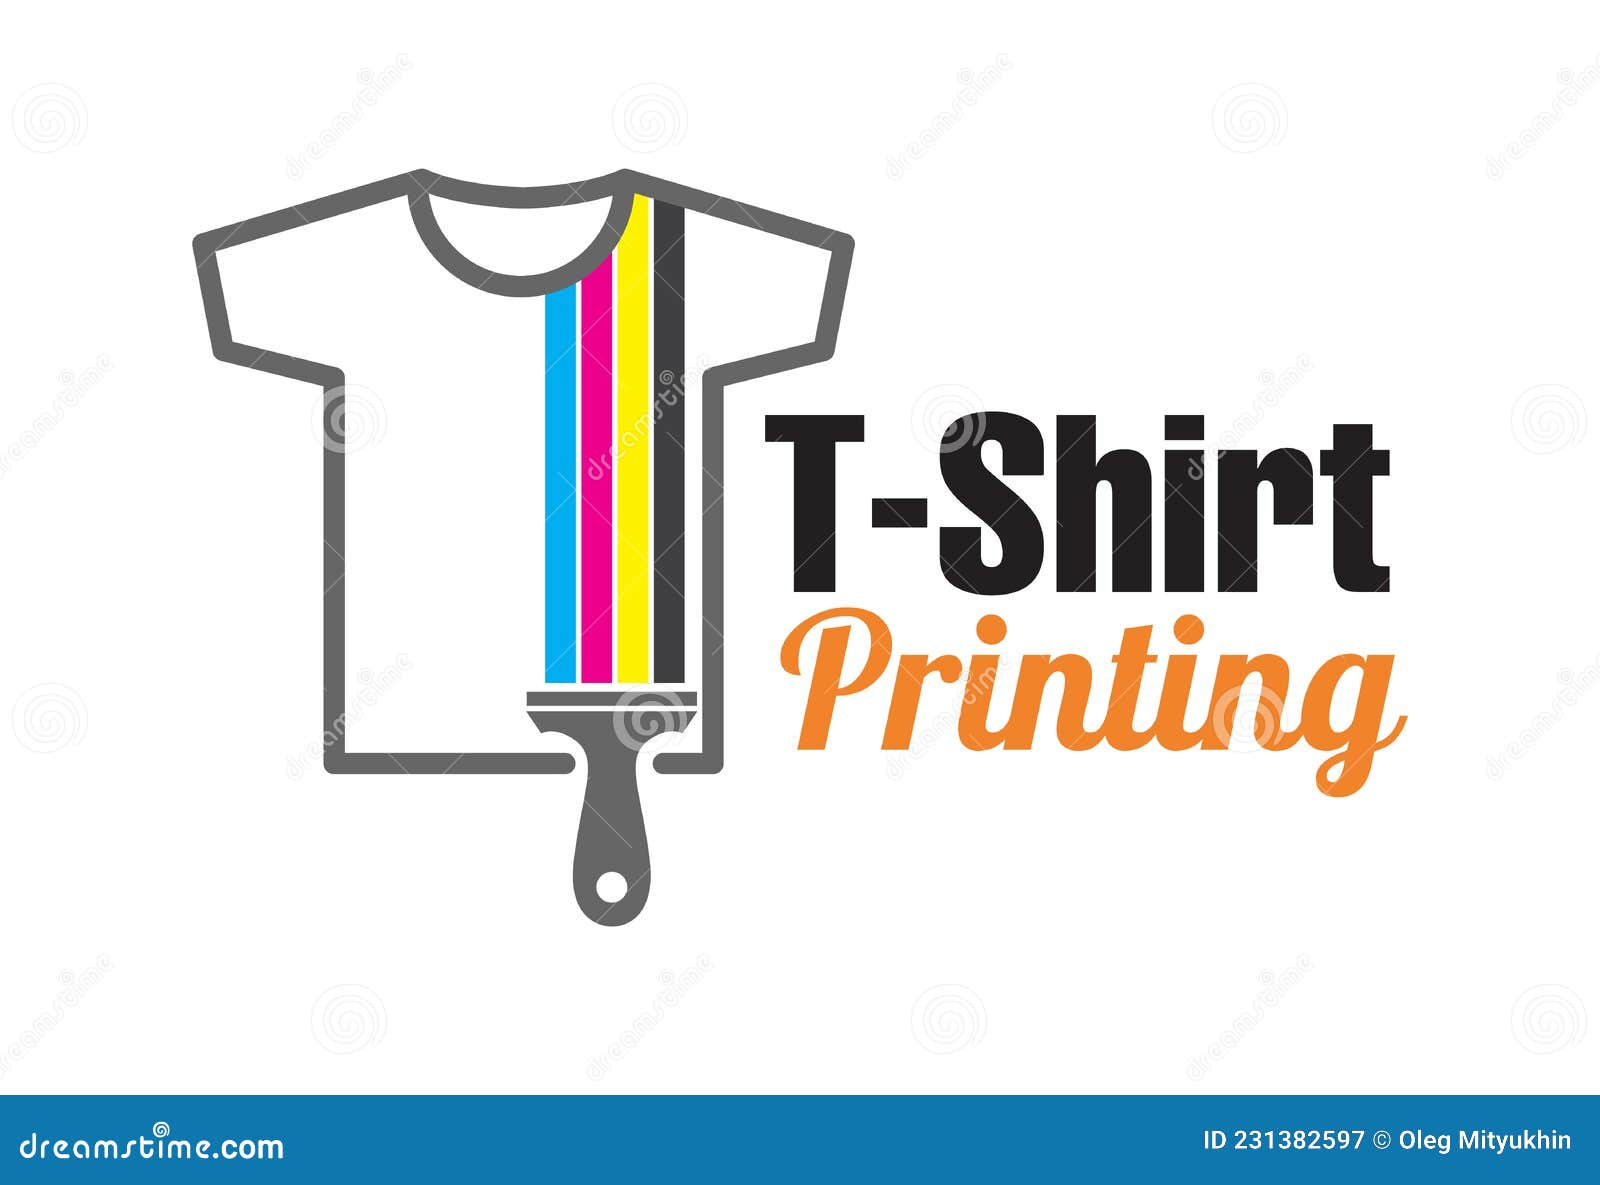 Abstract Creative Modern Colored Vector Logo Template of T-shirt ...